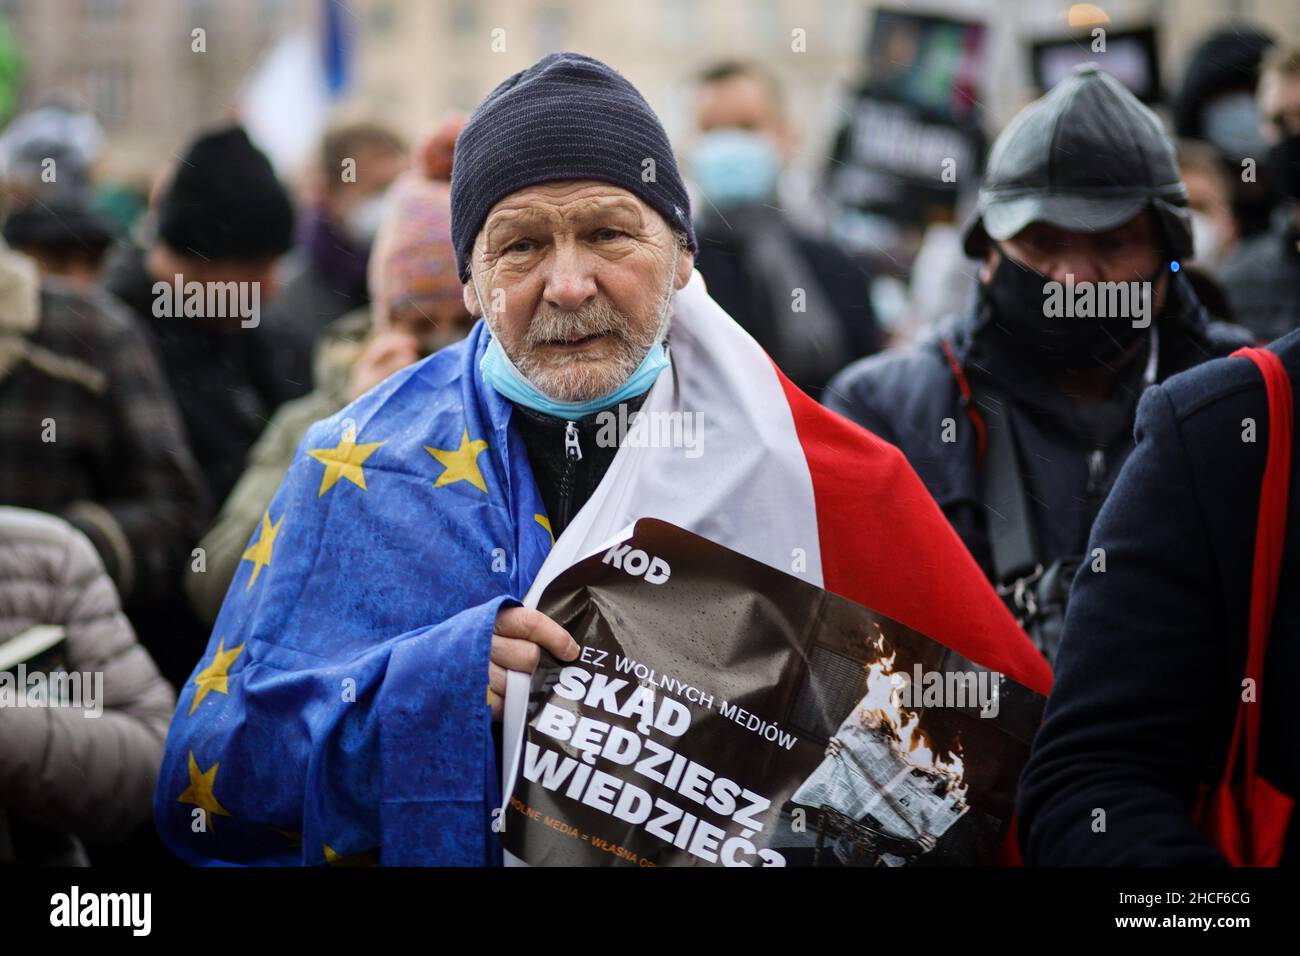 A senior protester holds a banner saying 'From where you would get the news?', advocating media freedom.  Poland's parliament recently passed a contro Stock Photo